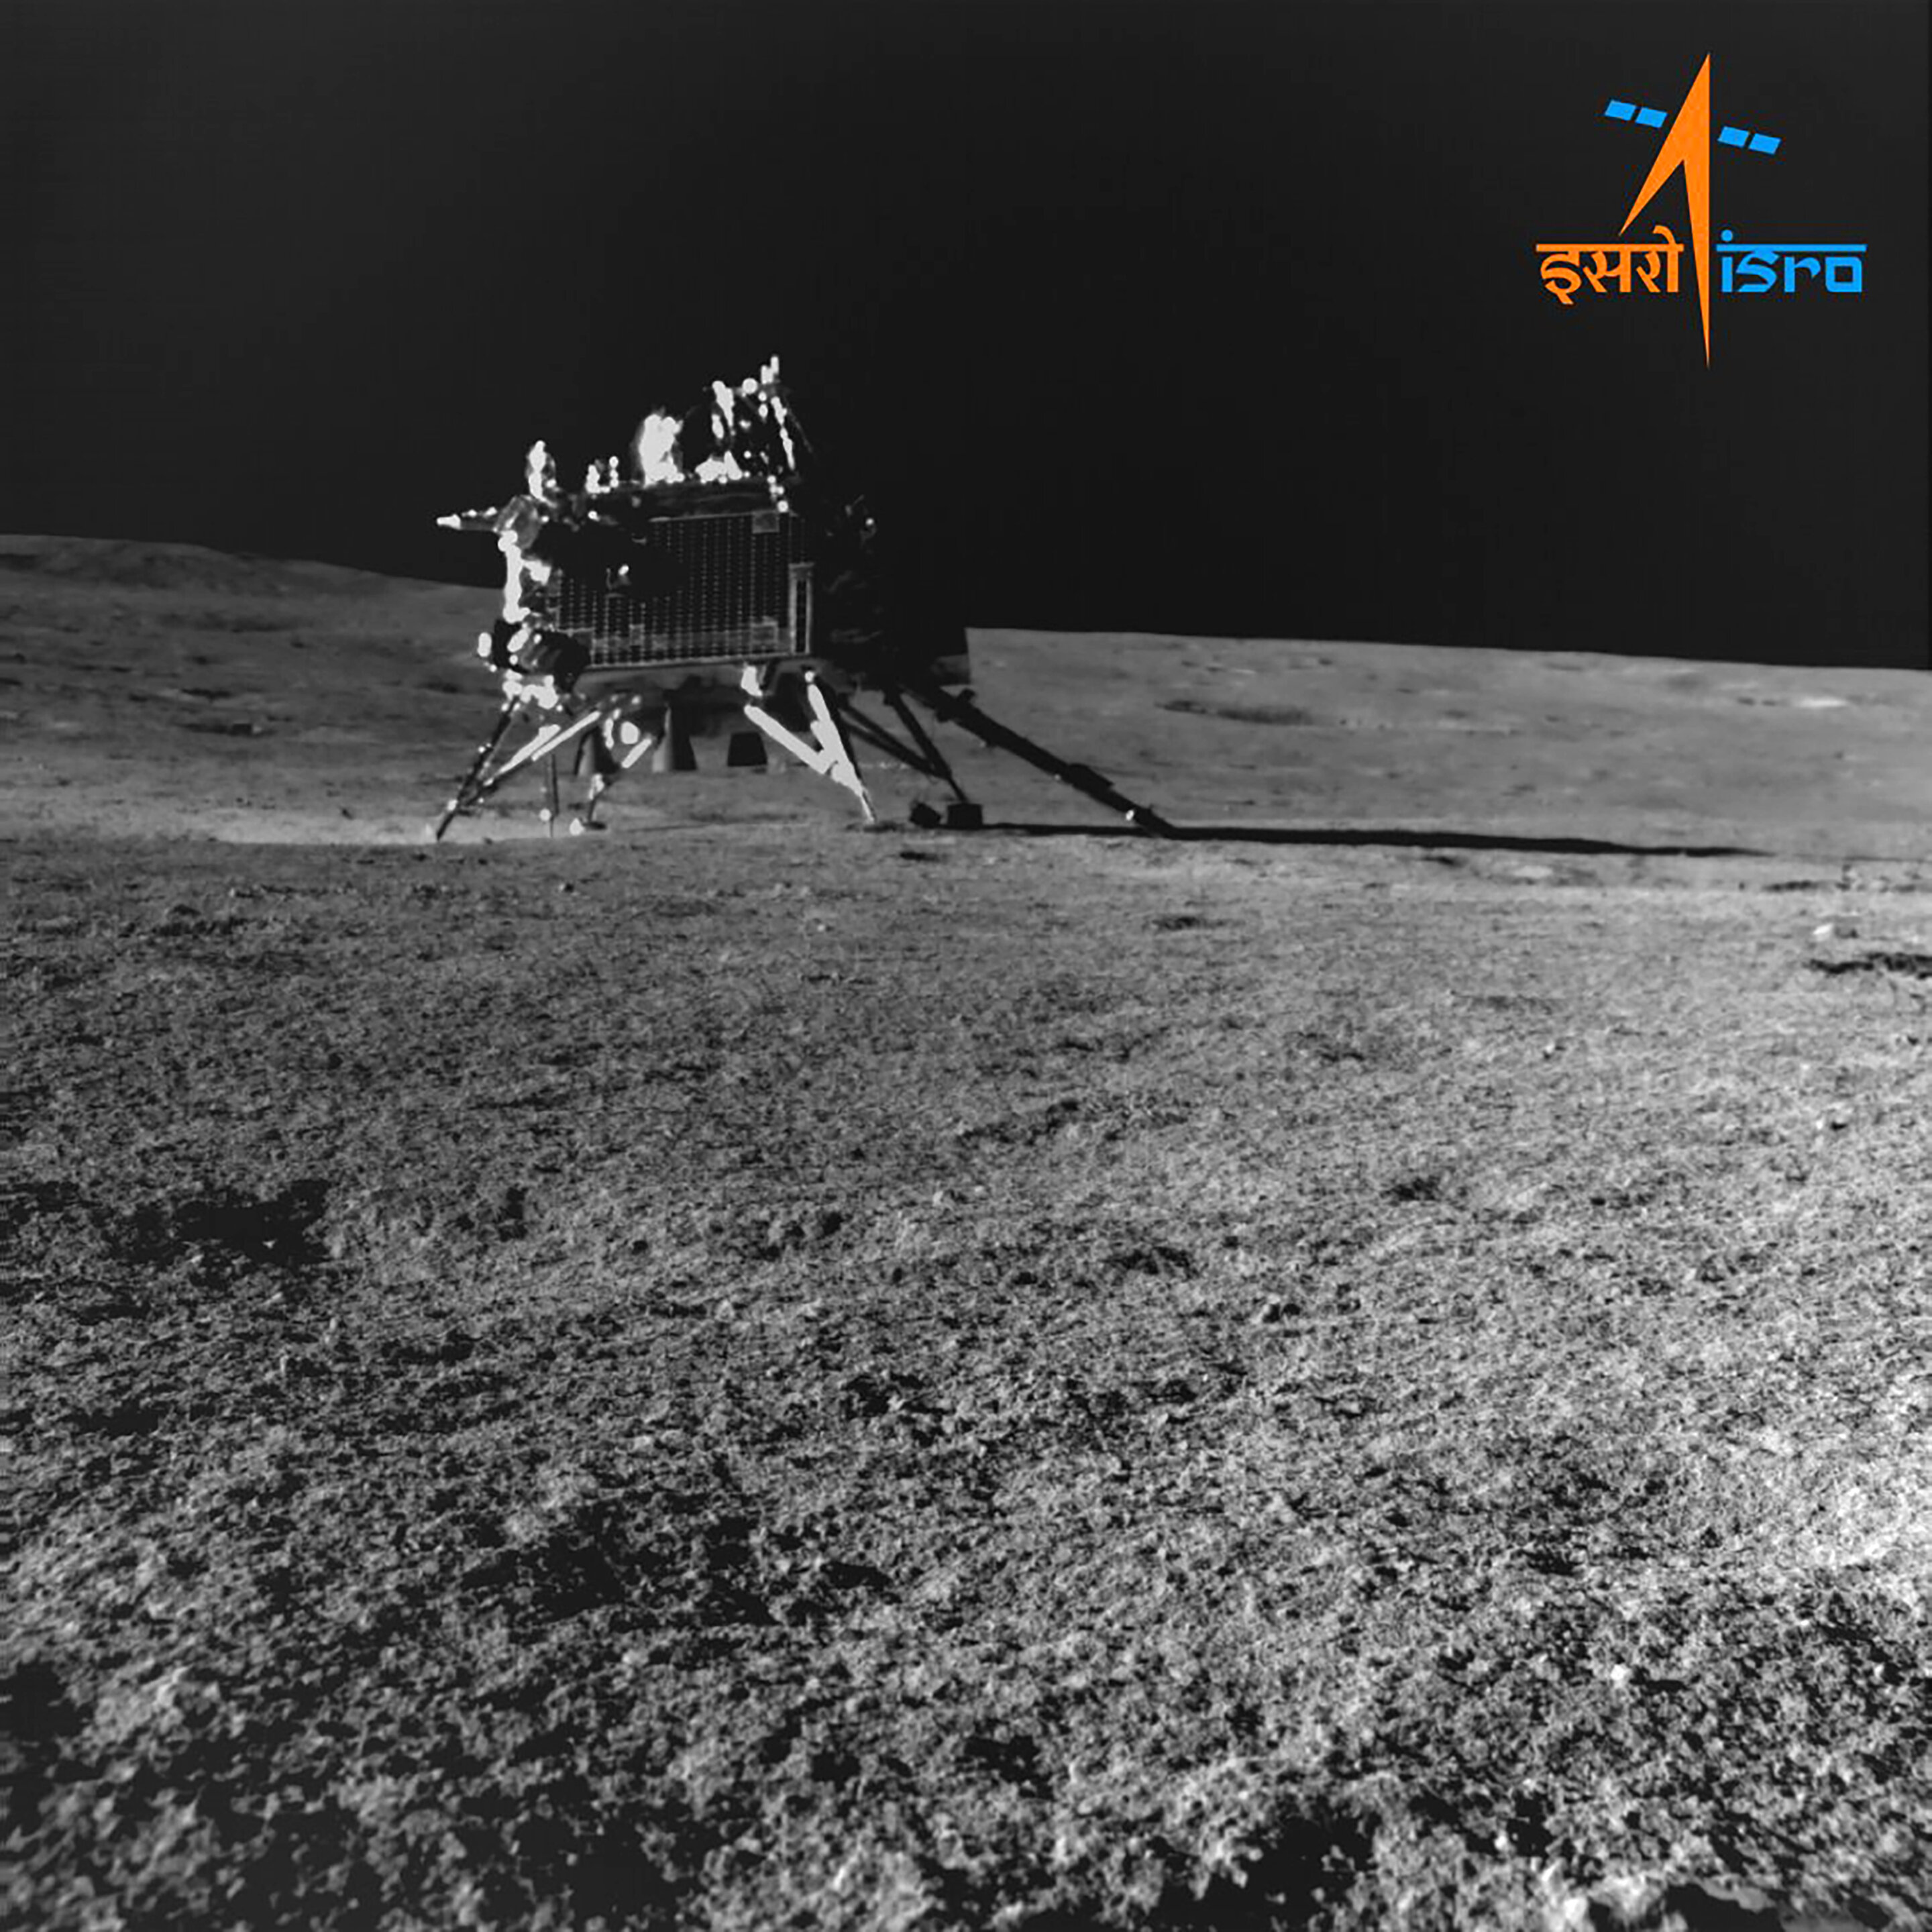 India’s moon rover completes its walk, scientists analyzing data looking for signs of frozen water.